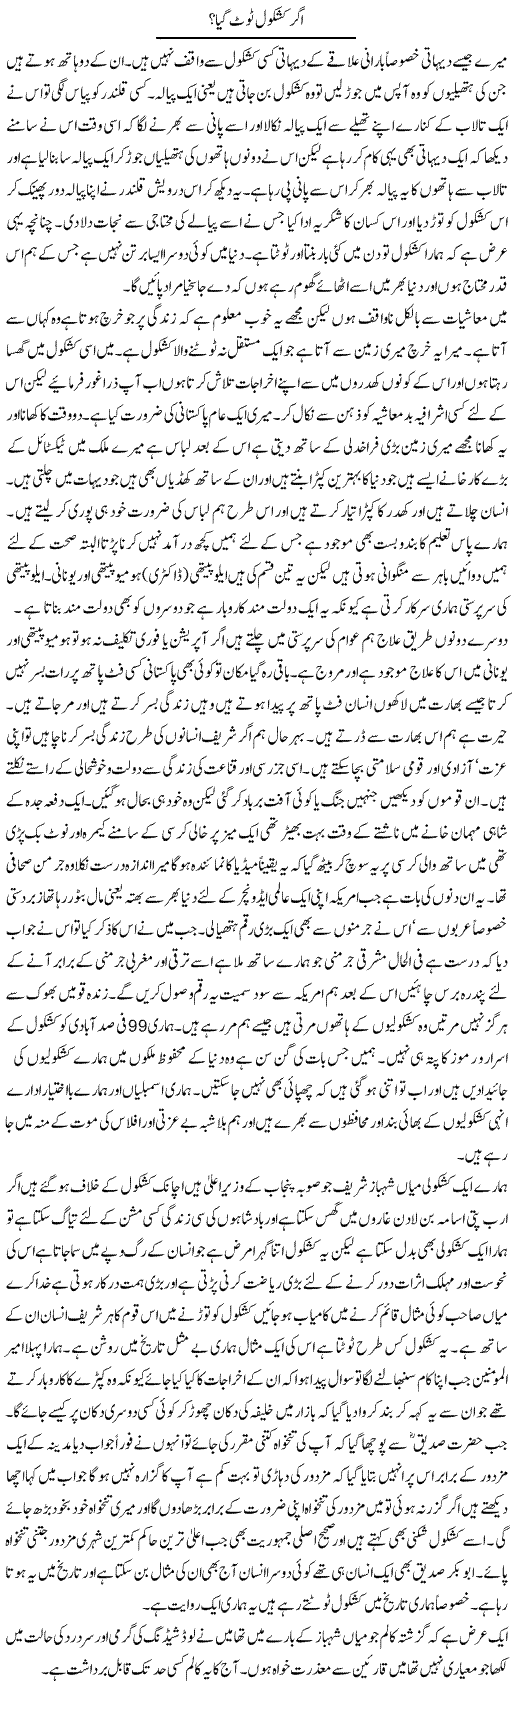 Living Without Foreign Aid - Urdu Column